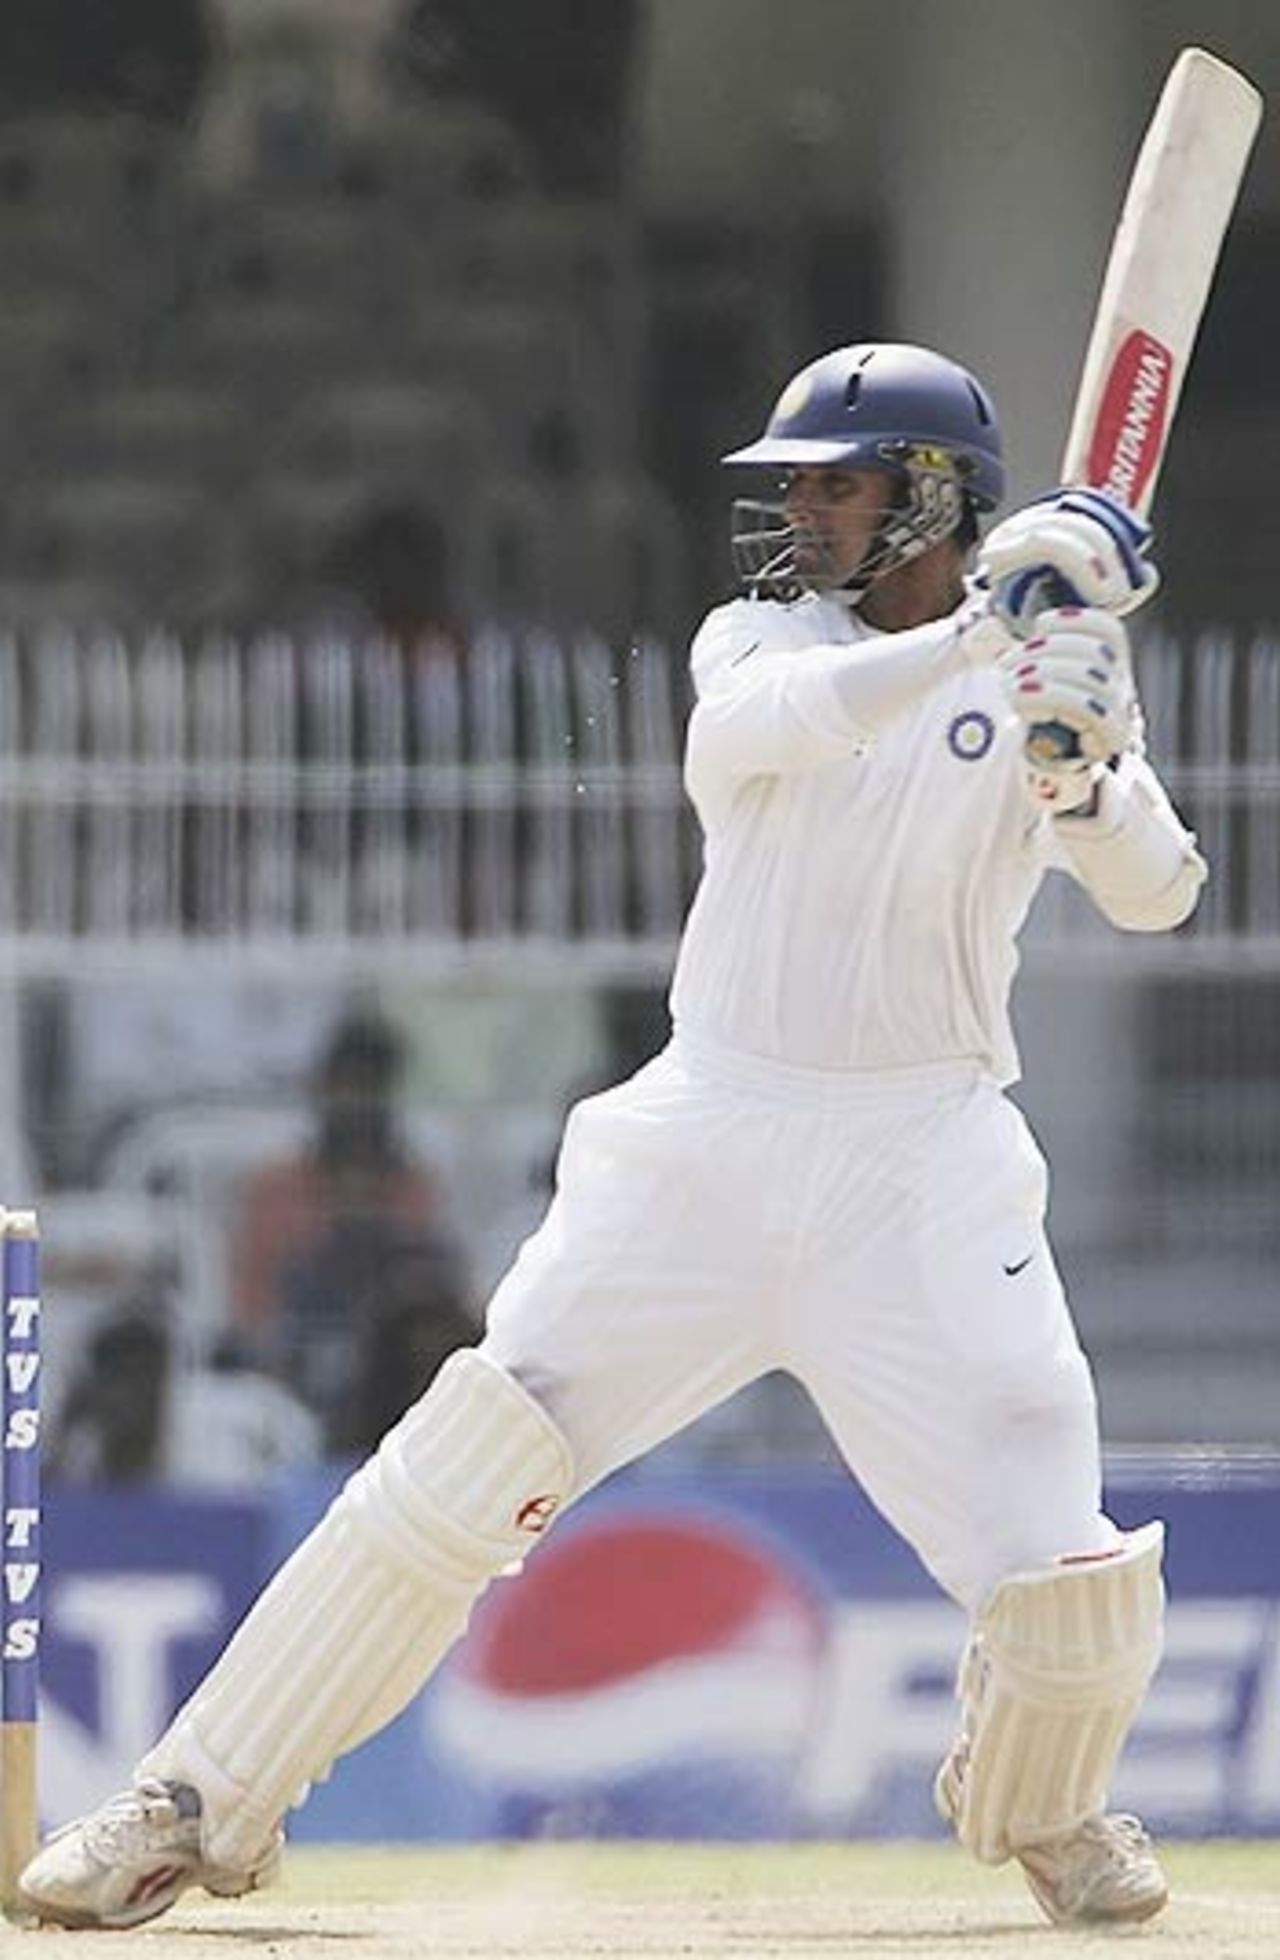 Rahul Dravid and India are good value at 13/10 (2.30) in Mohali